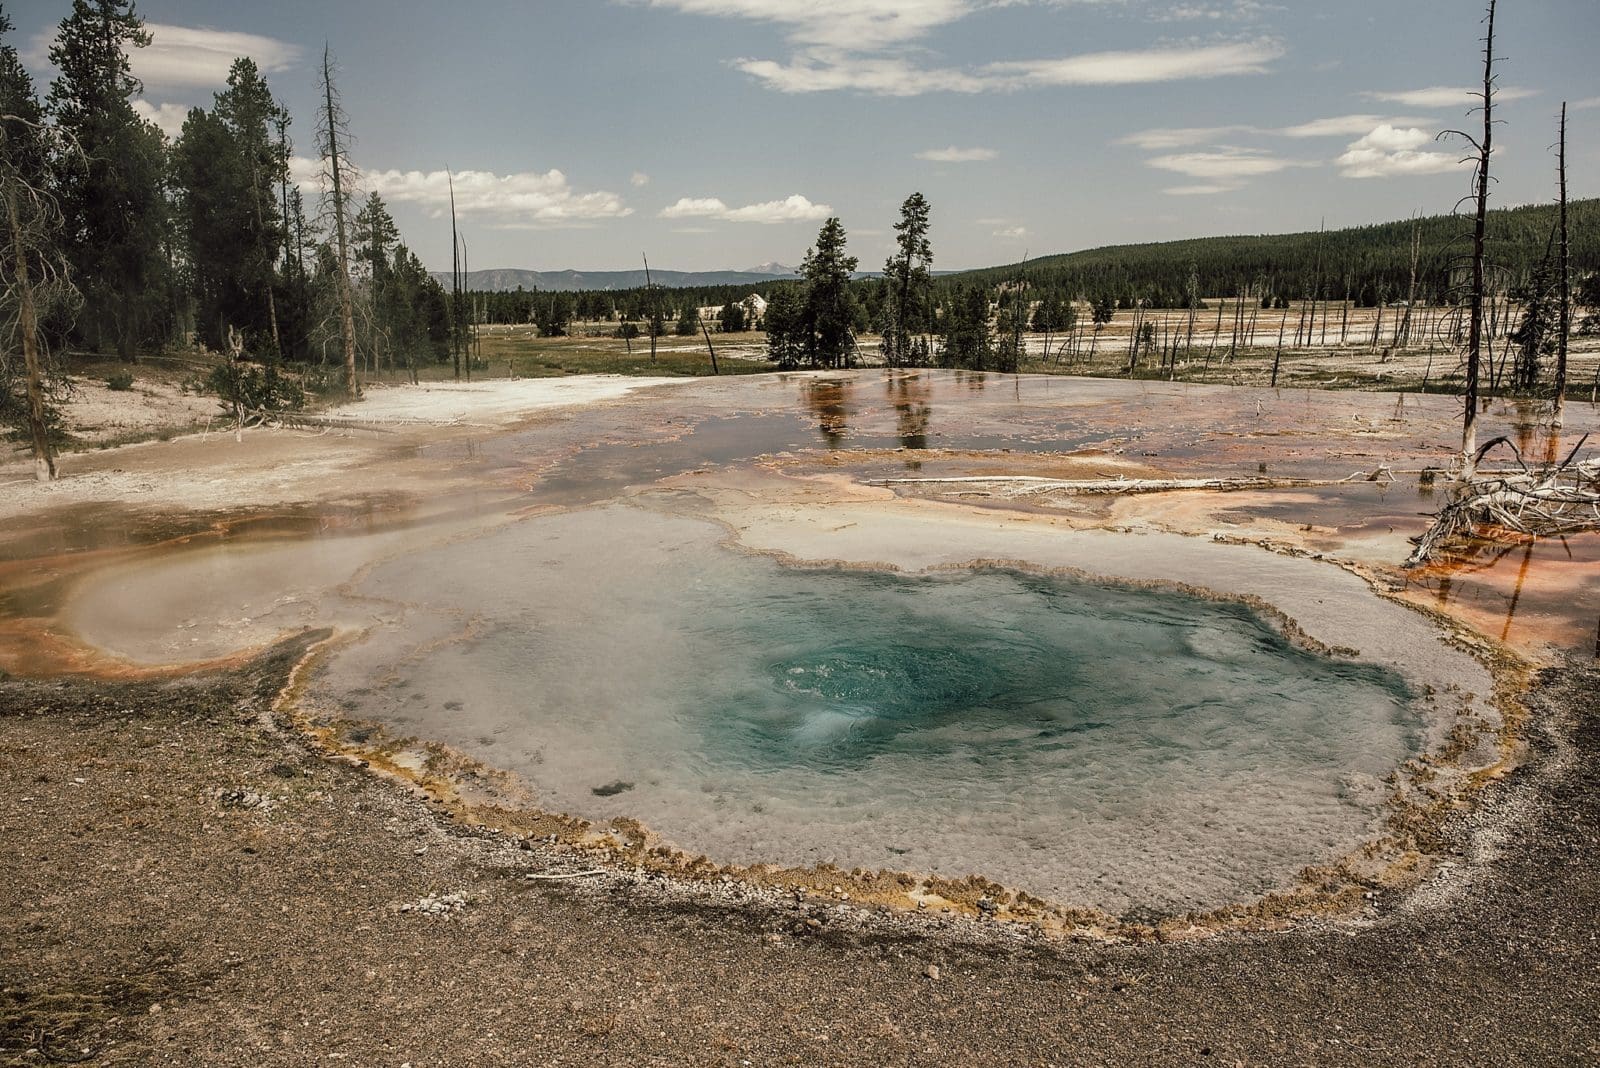 our summer vacation to yellowstone national park